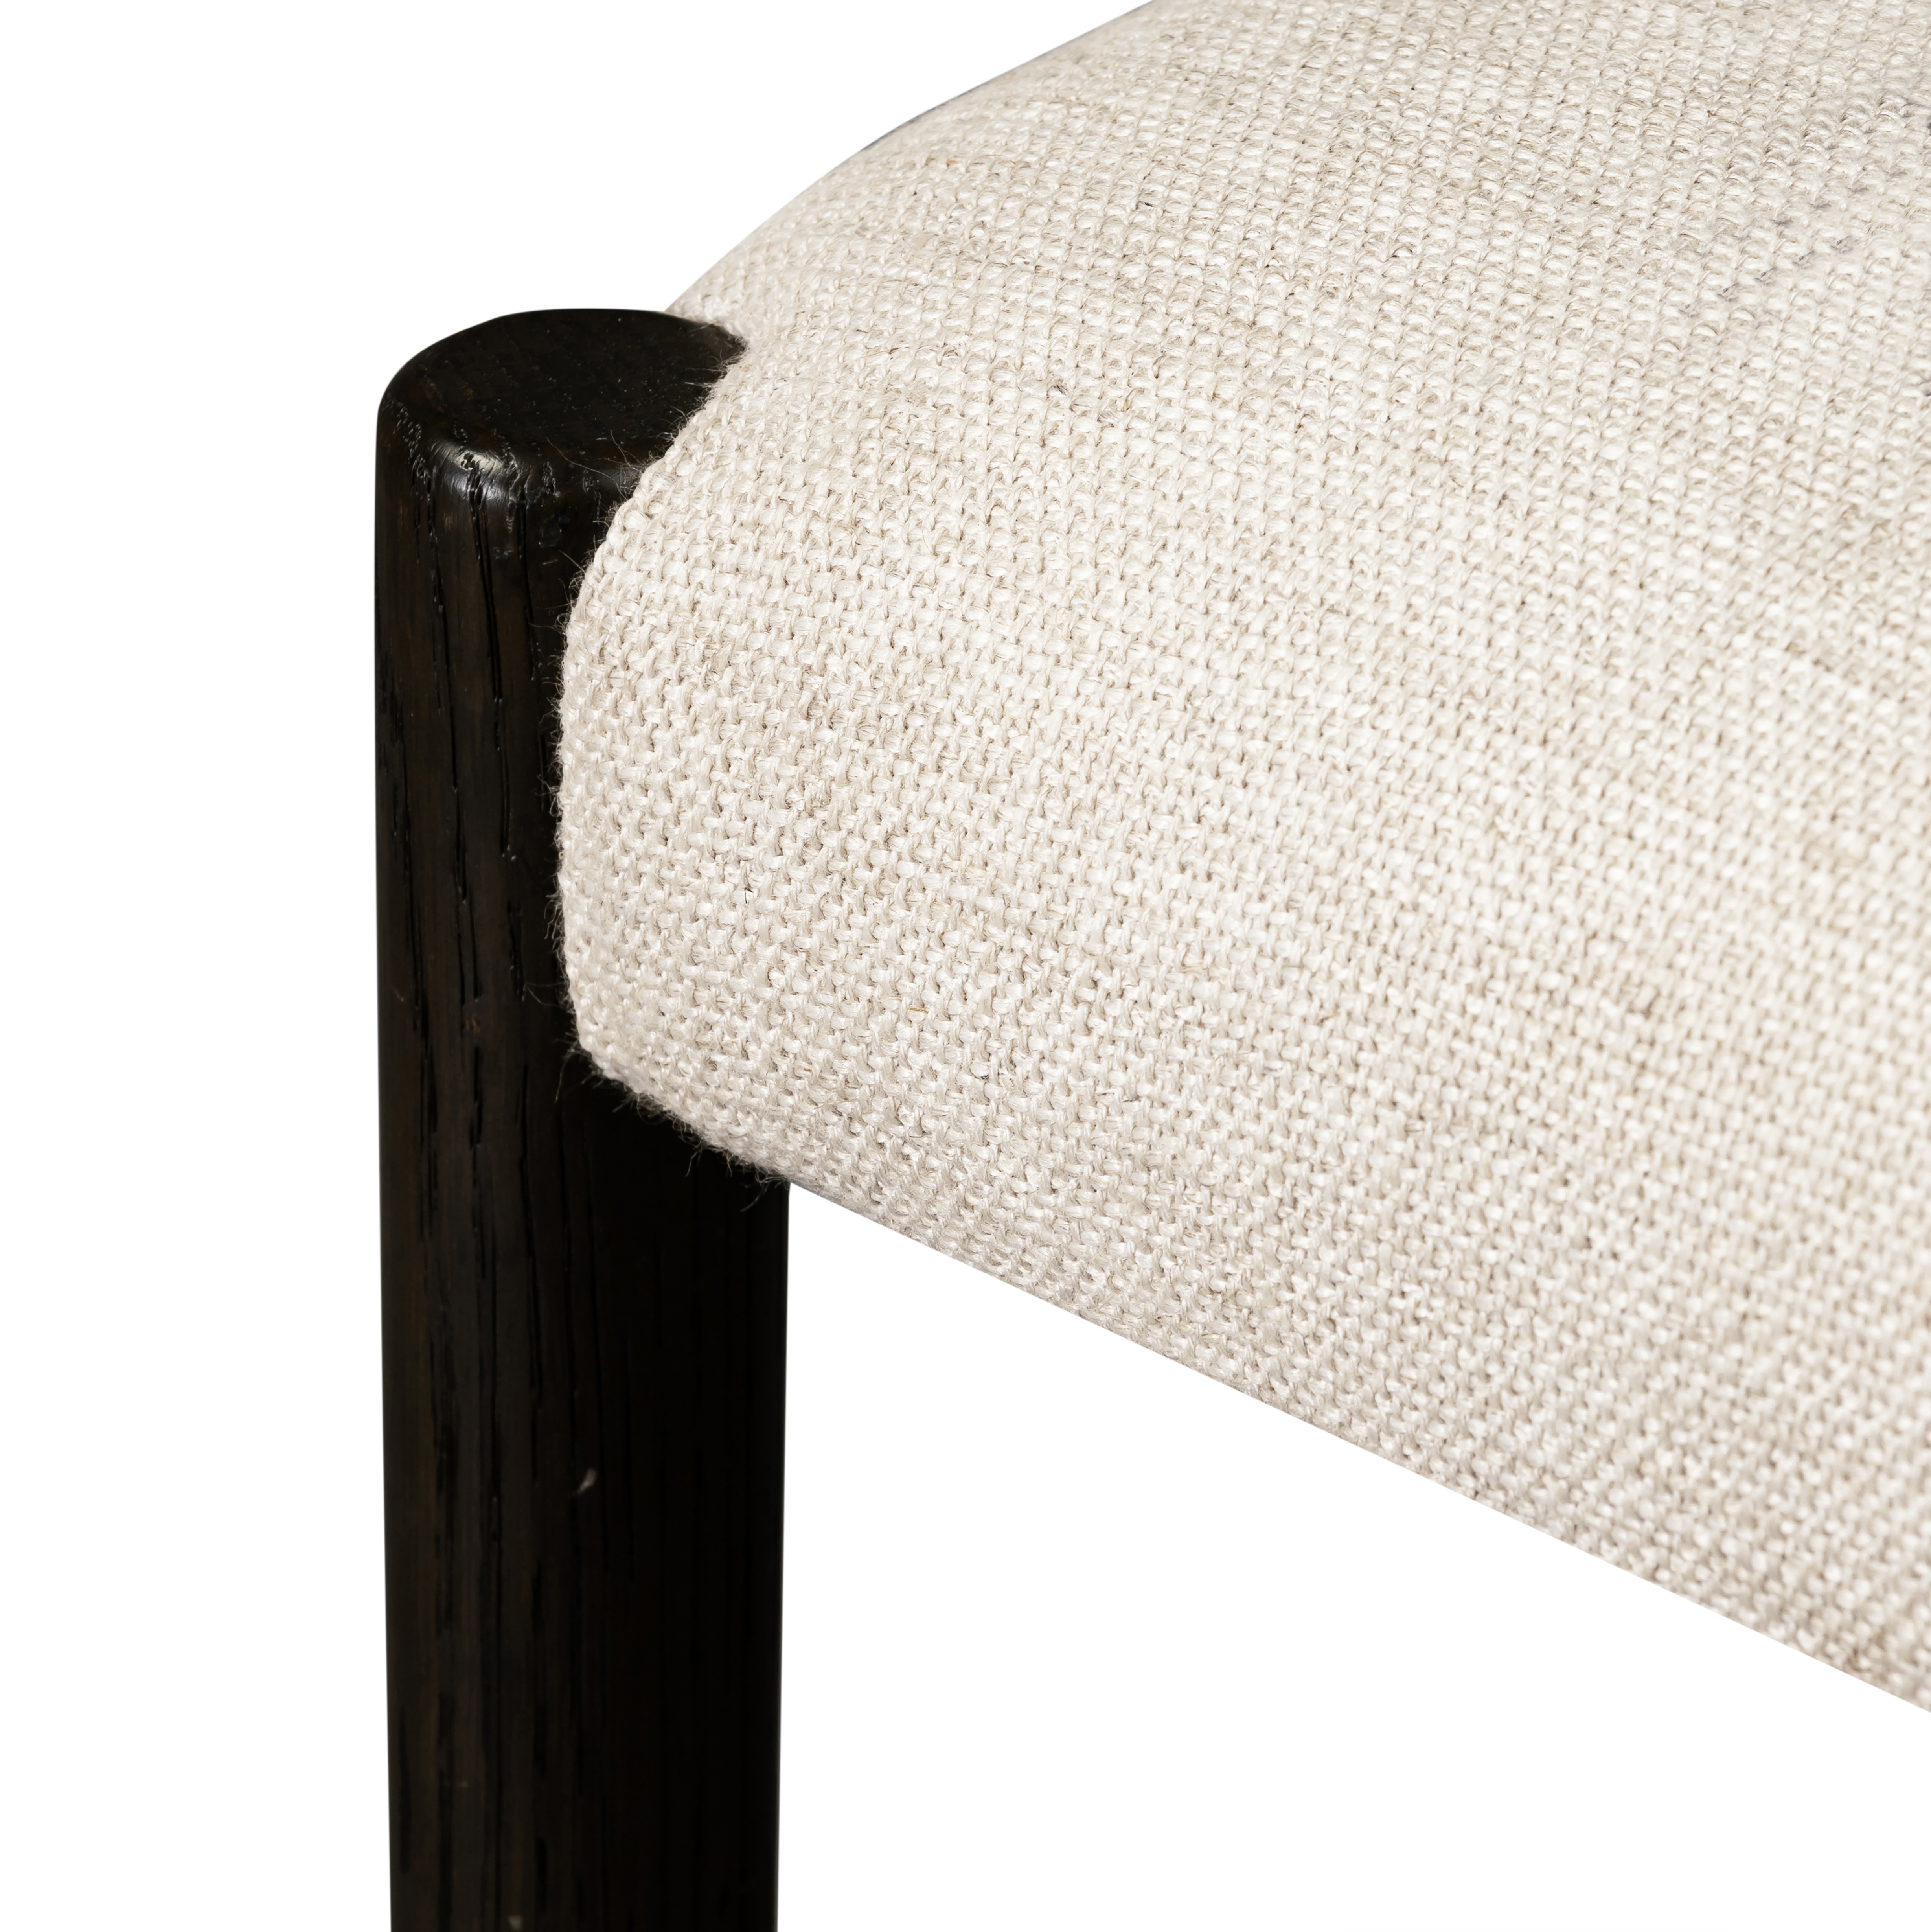 Glenmore Dining Chair-Essence Natural - Image 6